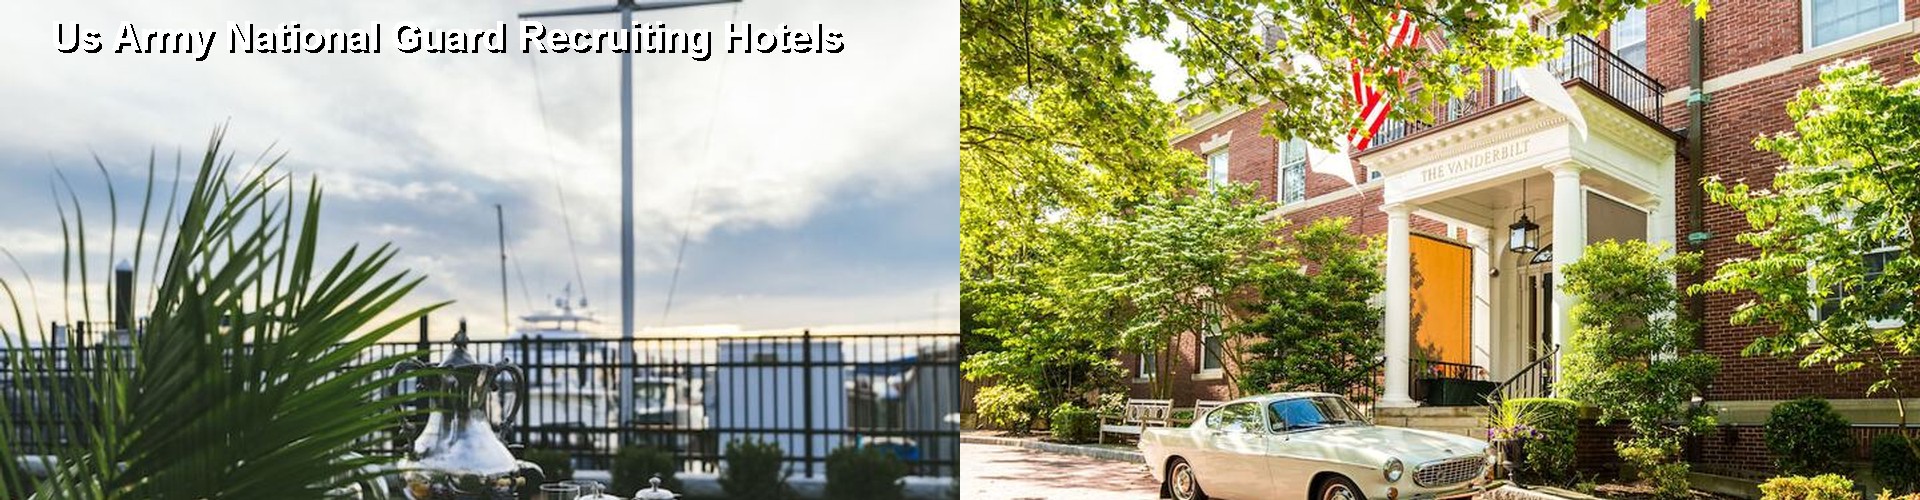 5 Best Hotels near Us Army National Guard Recruiting